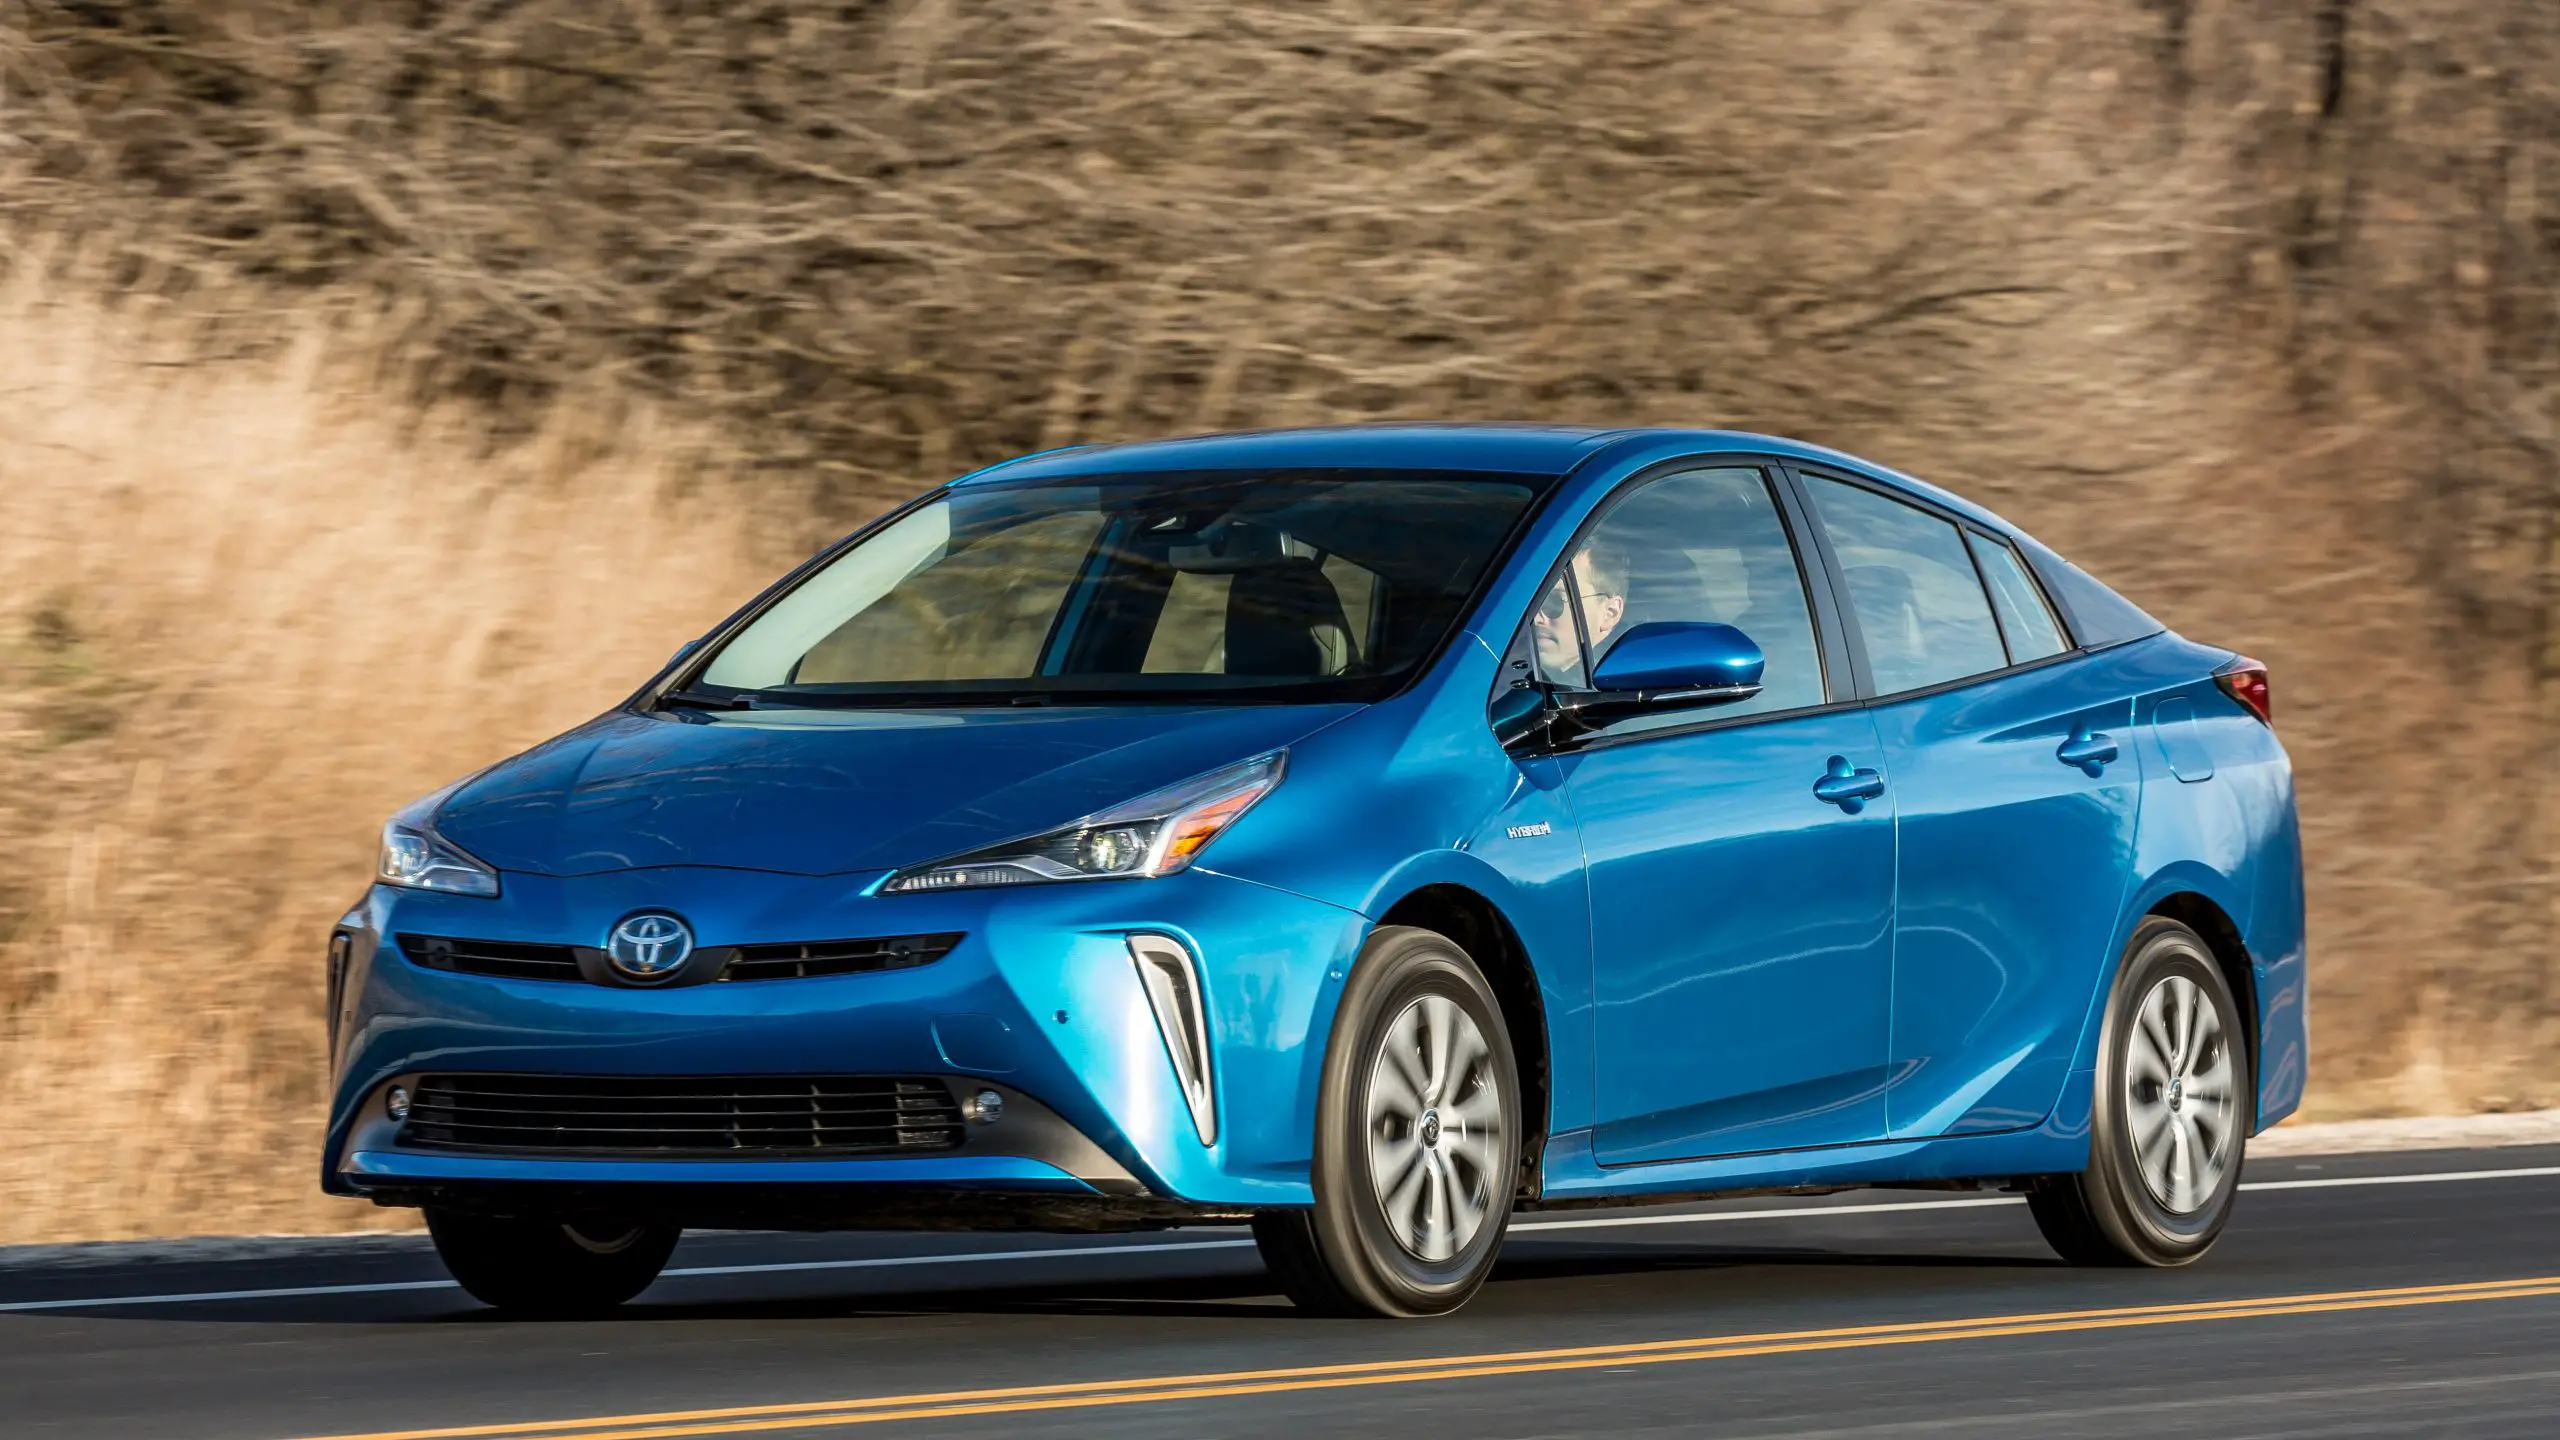 10 Best AWD Cars for Gas Mileage in 2020